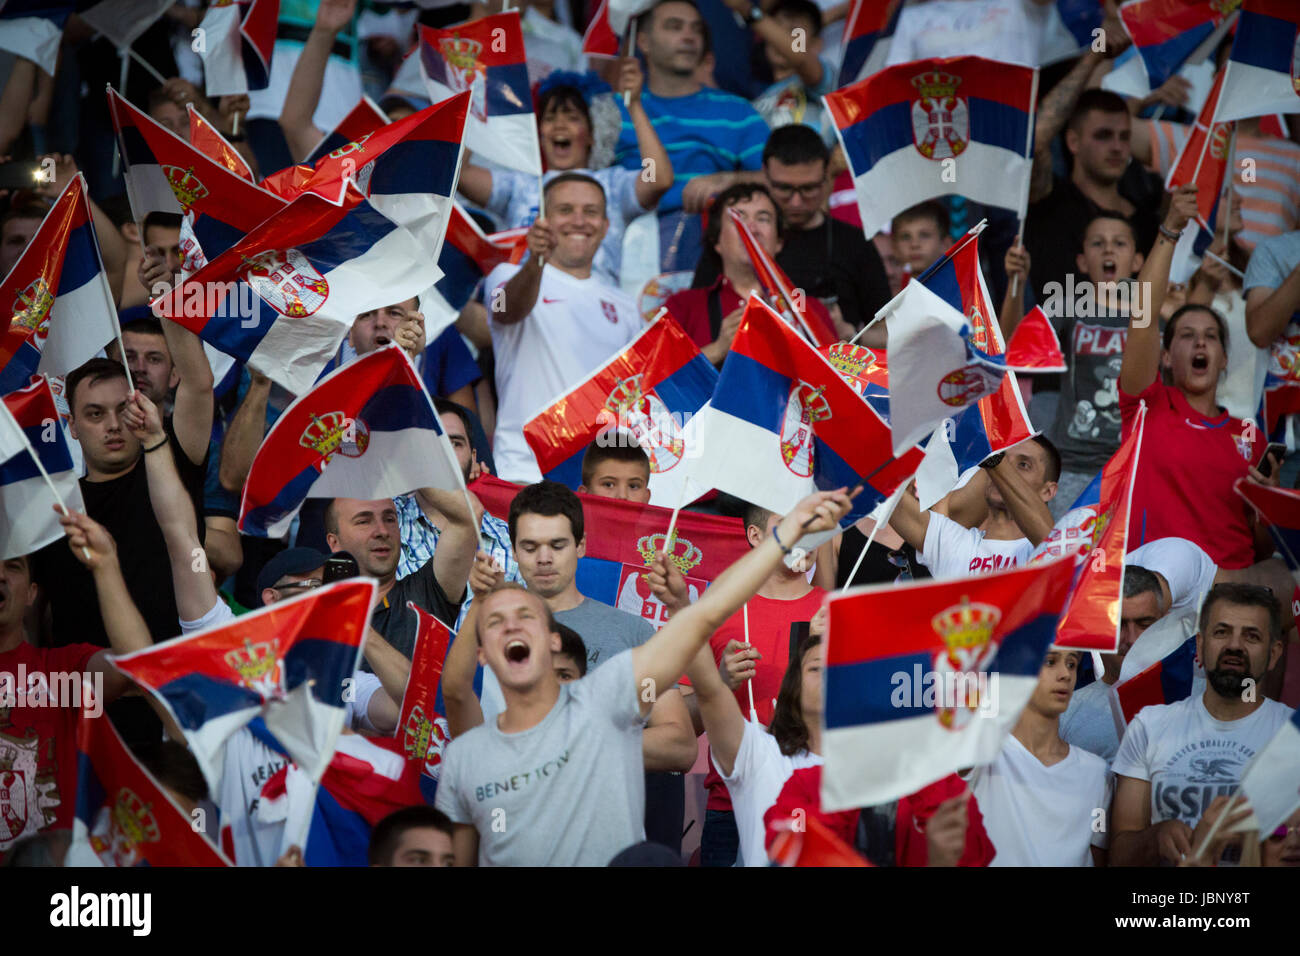 BELGRADE, SERBIA - JUNE 11, 2017: Serbian fans during the 2018 FIFA World Cup Qualifier match between Serbia and Wales at Rajko Mitic Stadium on June  Stock Photo